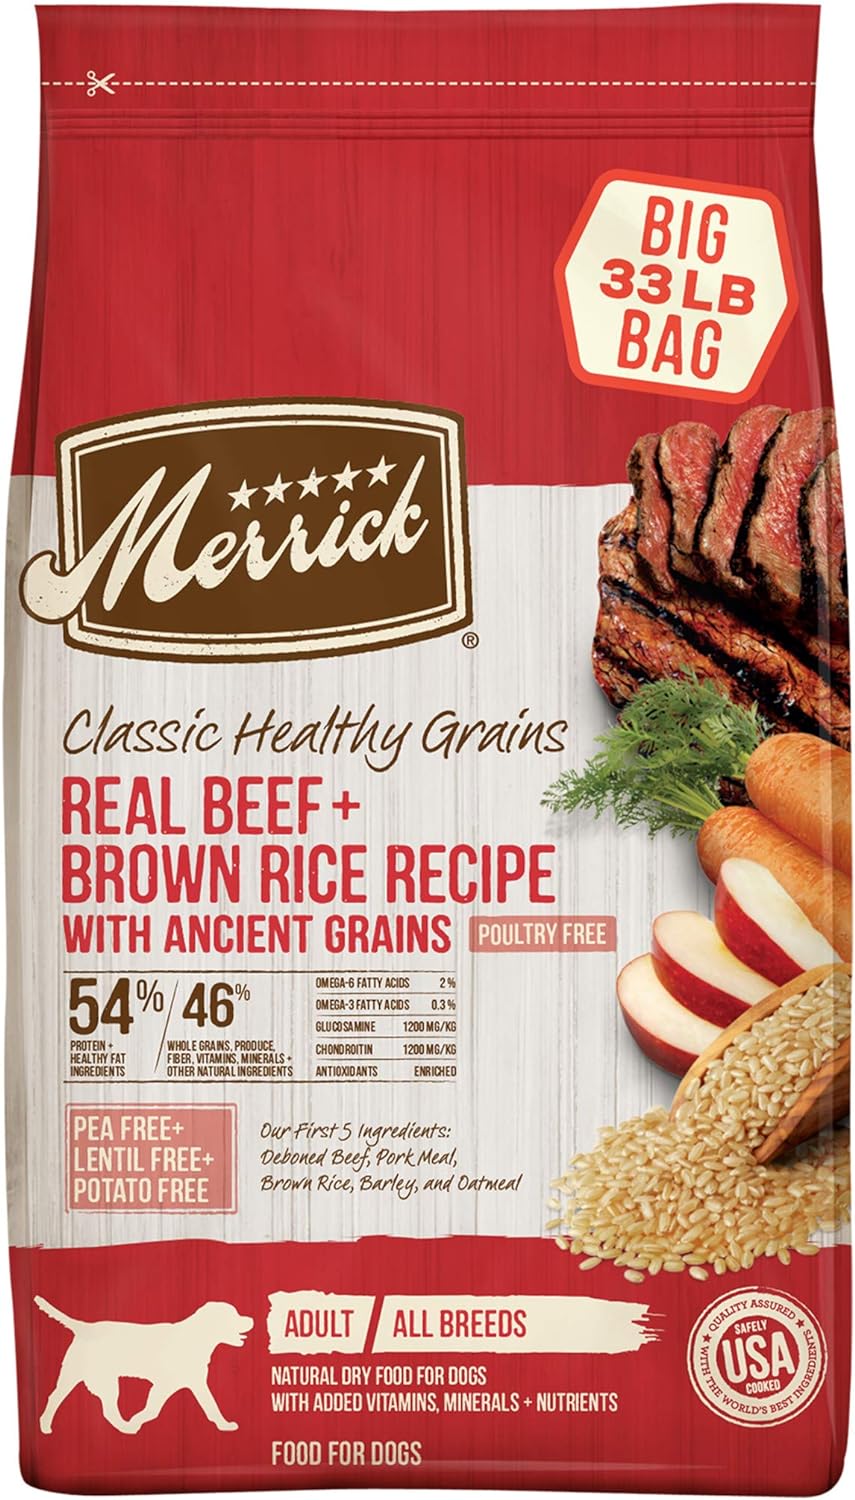 Merrick Classic Healthy Grains Real Beef + Brown Rice Recipe with Ancient Grains Dry Dog Food – Gallery Image 1